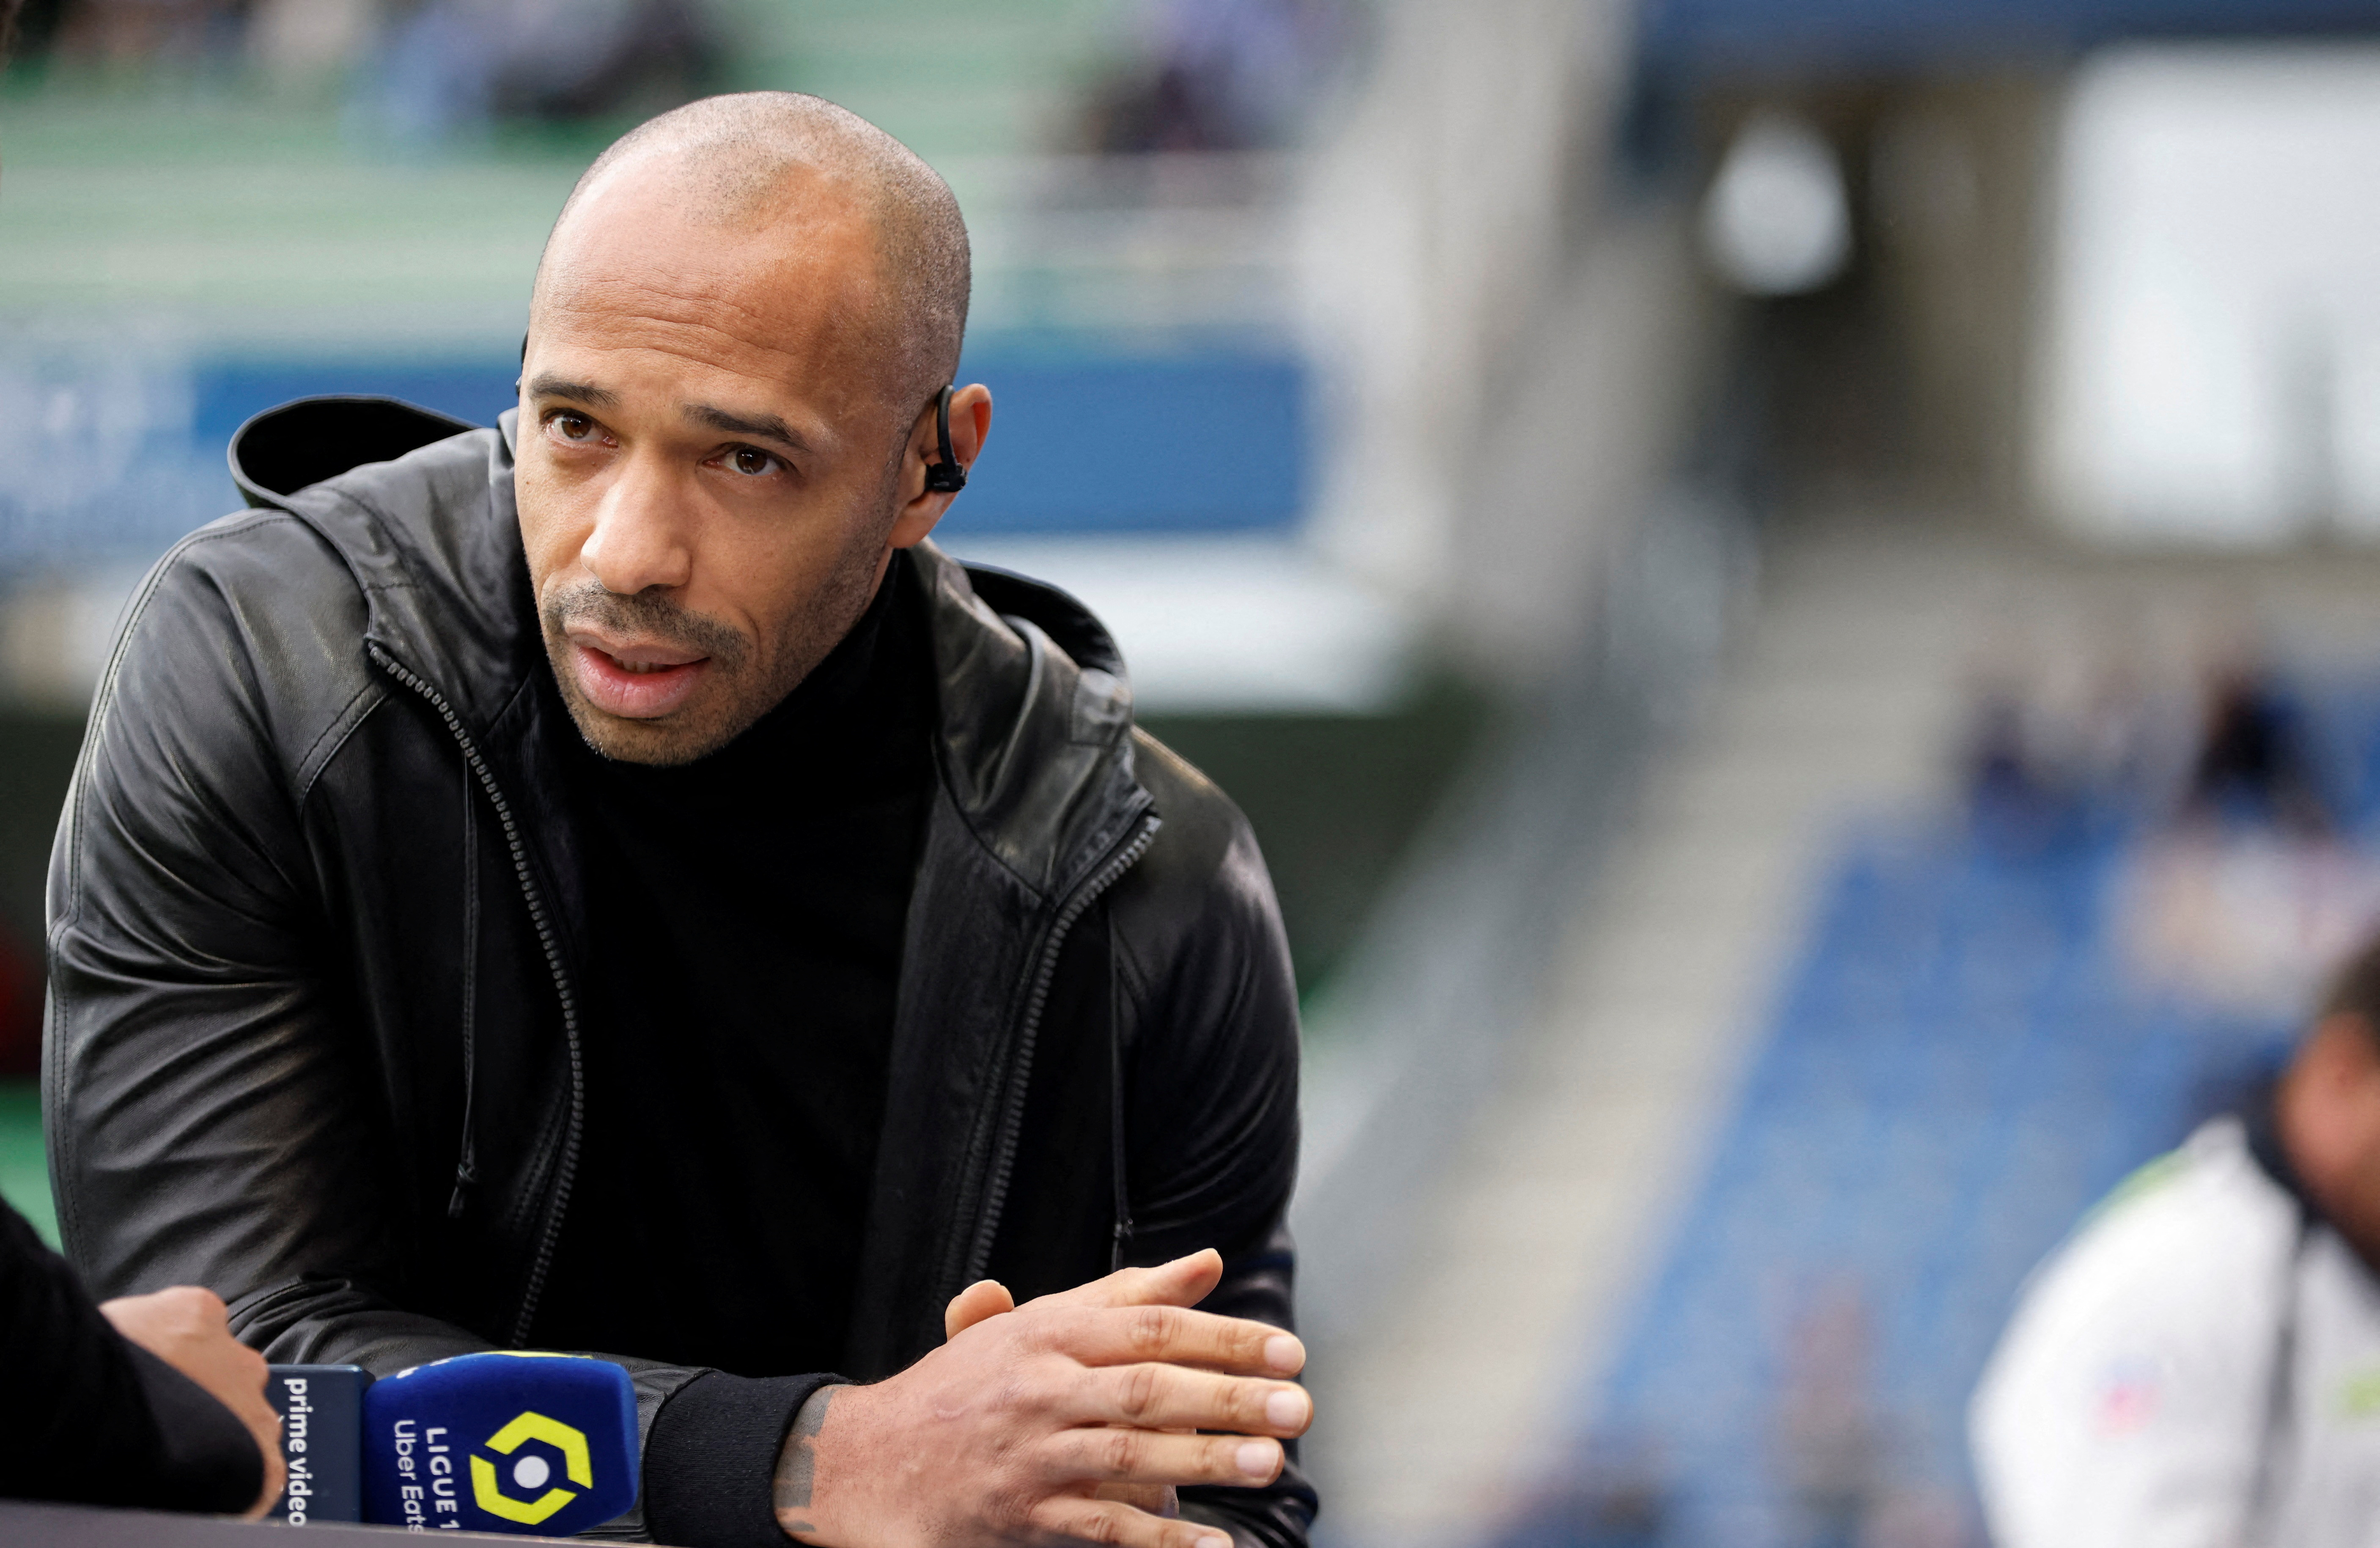 Henry appointed France Under-21 coach